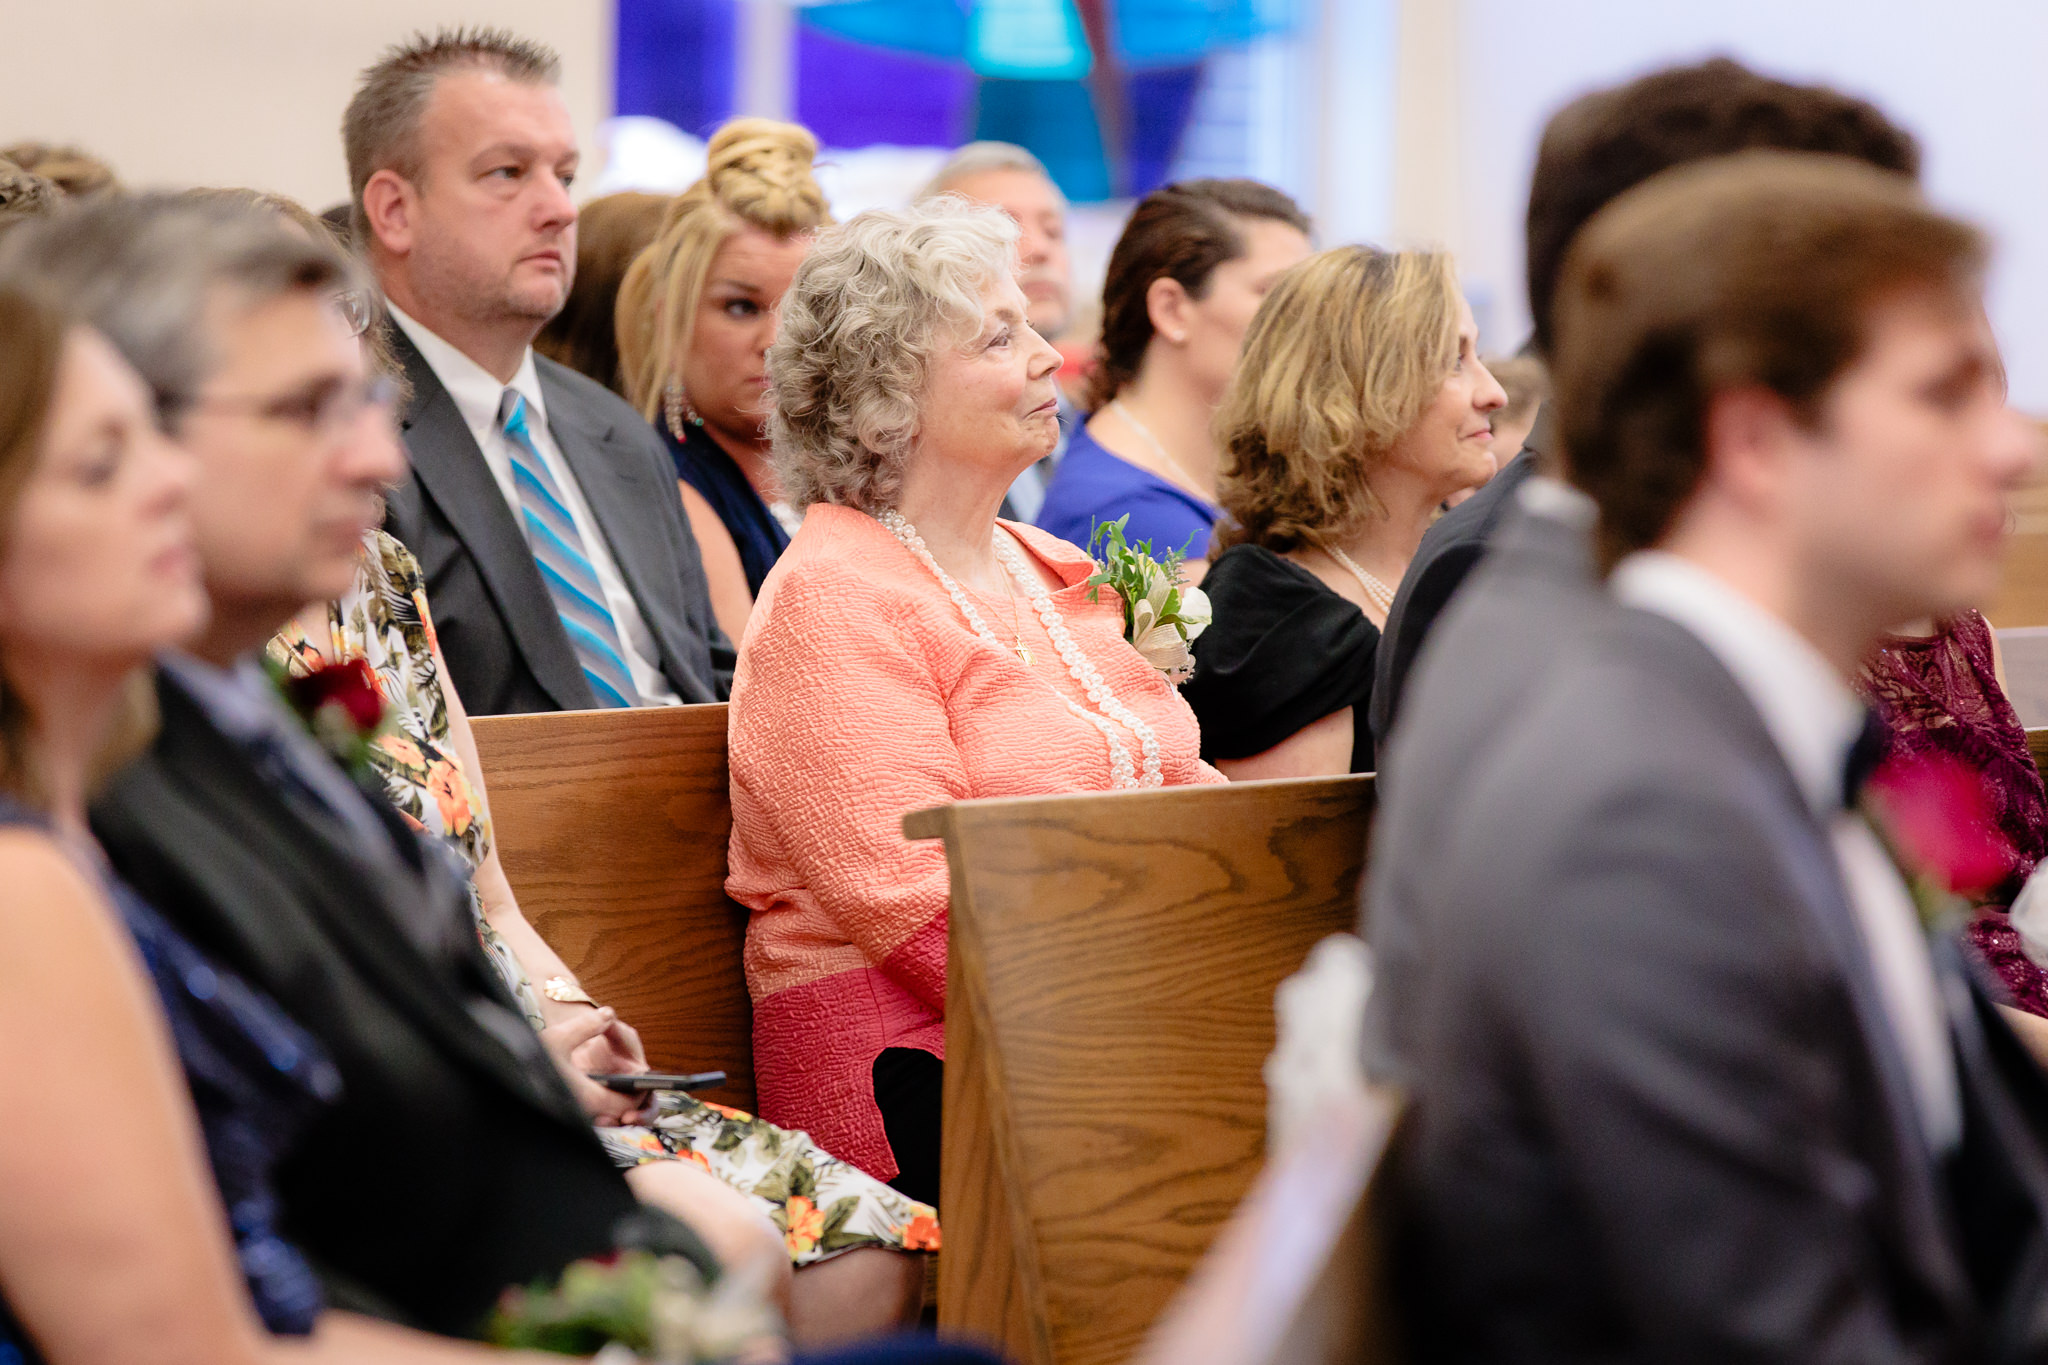 Grandmother of the bride smiles during a wedding ceremony at Saint Monica Parish in Beaver, PA